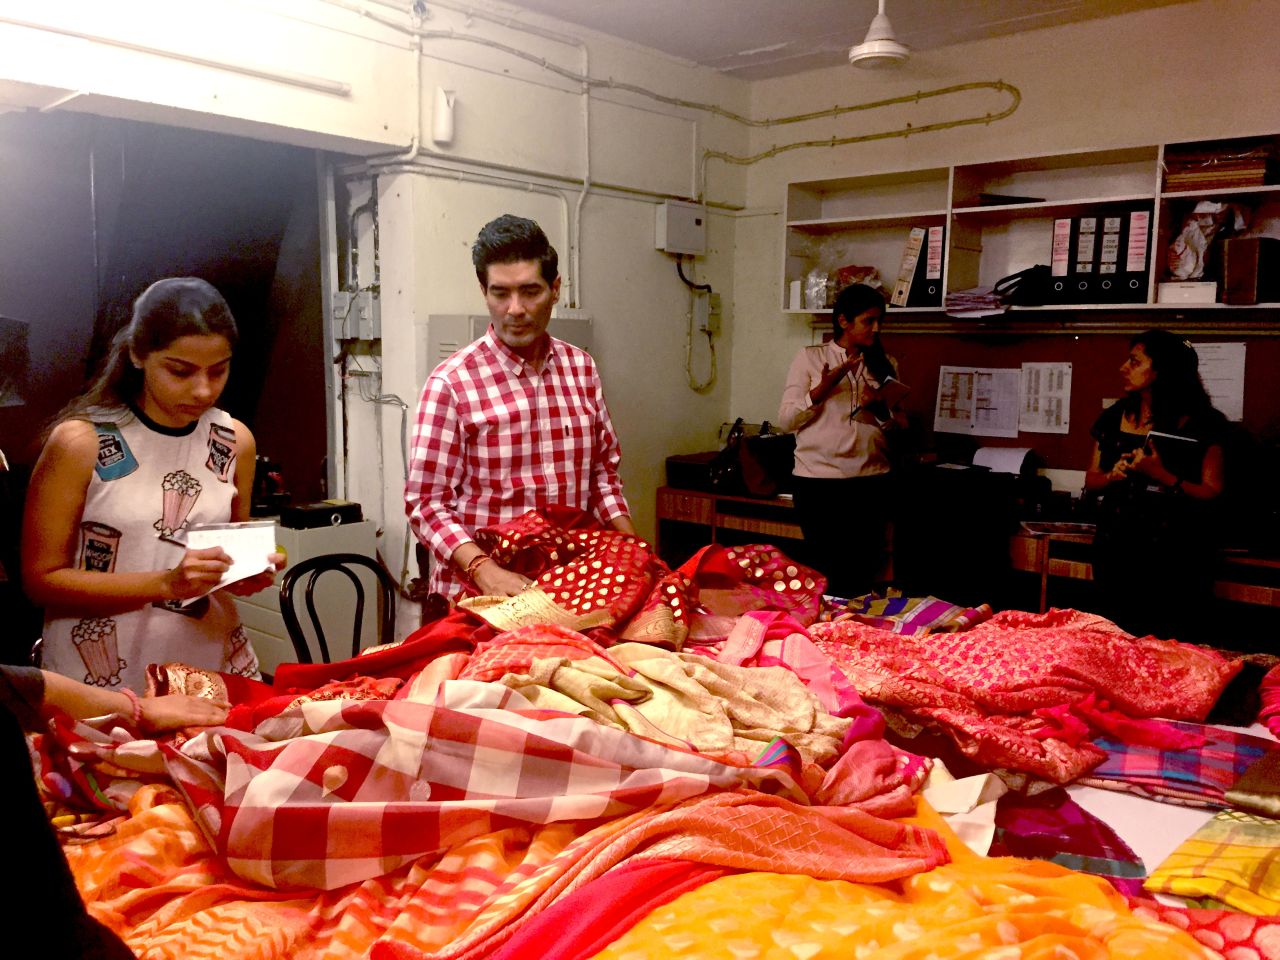 Manish Malhotra inspects saris from his "Regal Threads" line in his Mumbai store's basement.